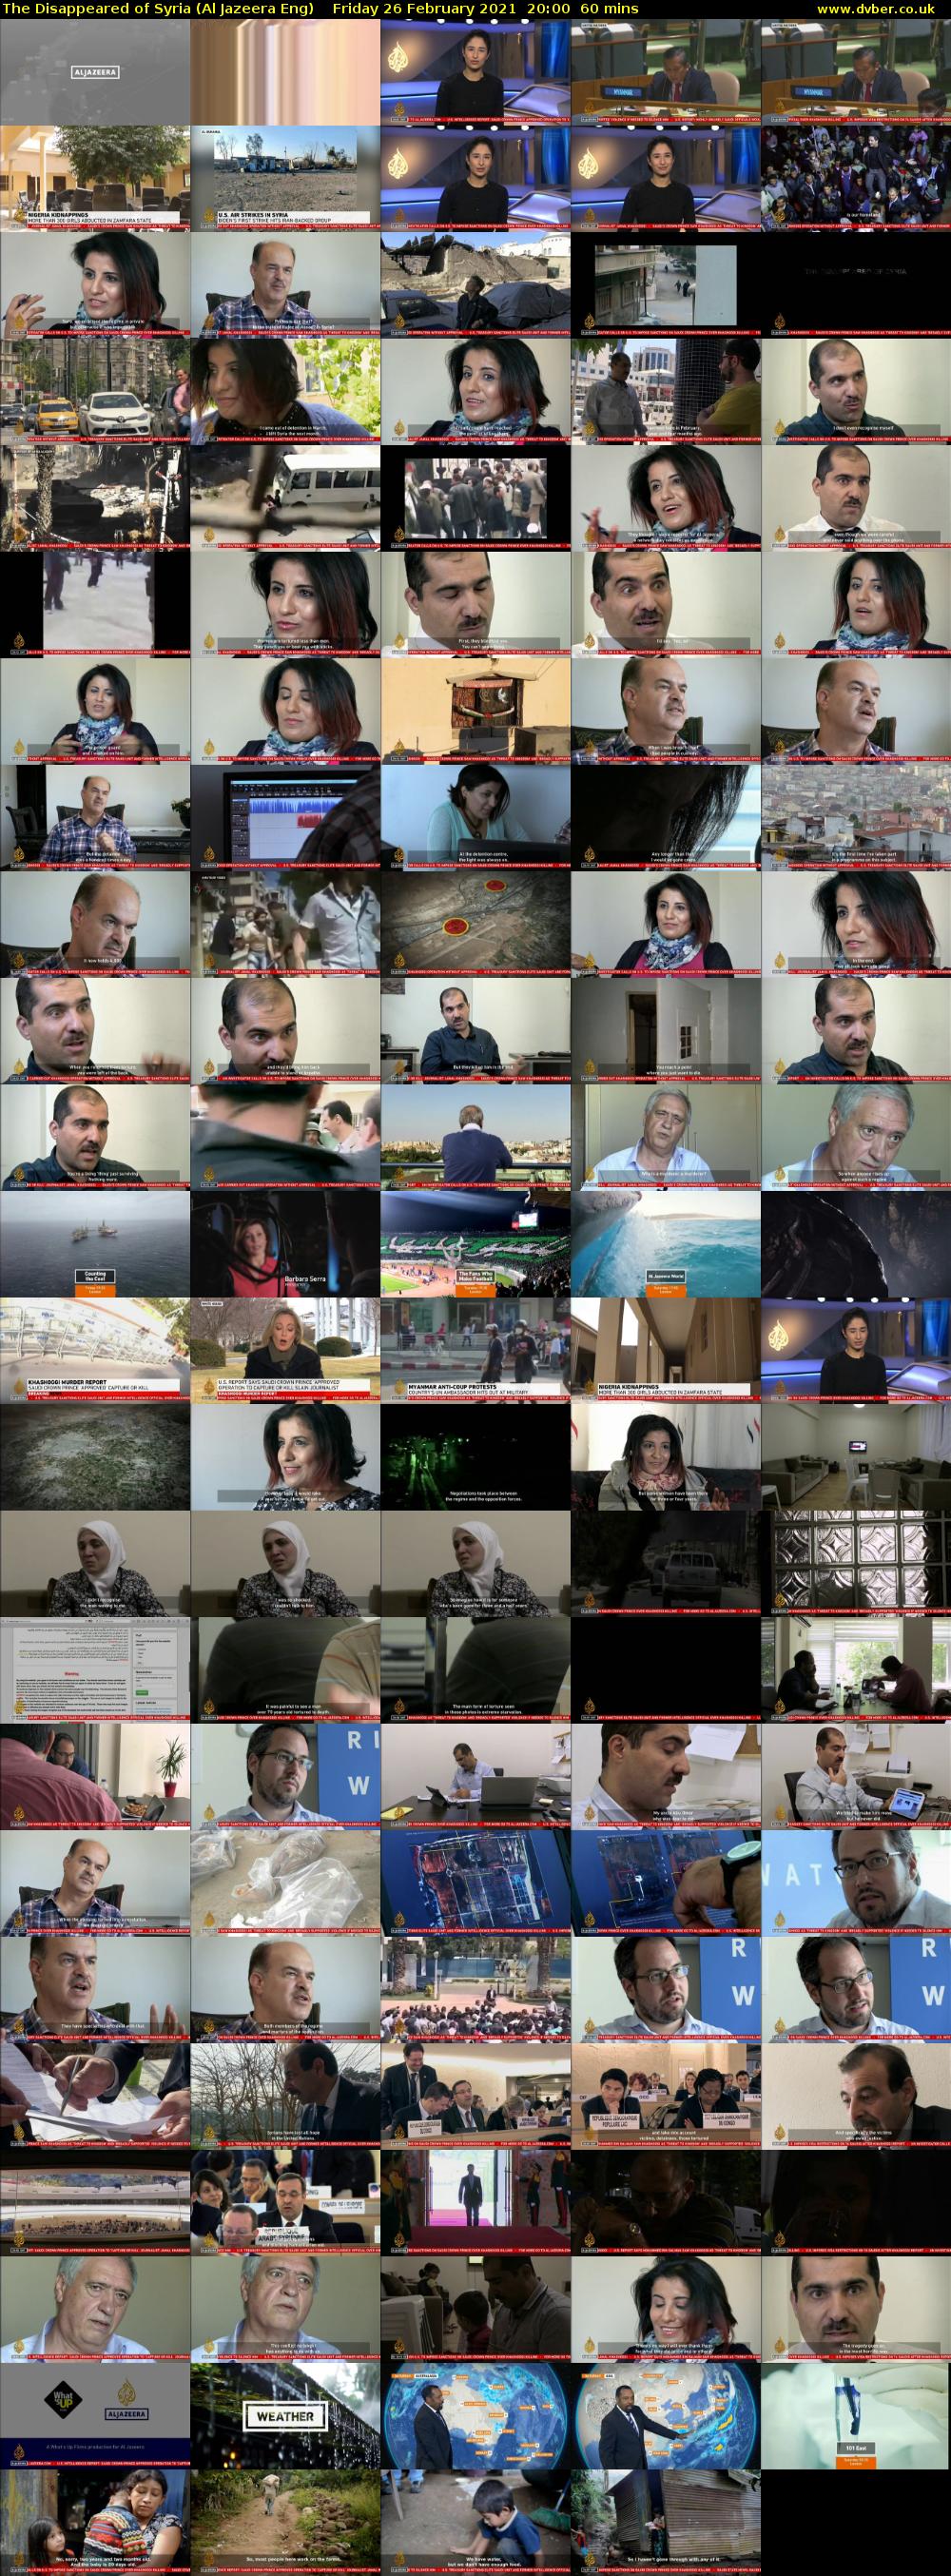 The Disappeared of Syria (Al Jazeera Eng) Friday 26 February 2021 20:00 - 21:00